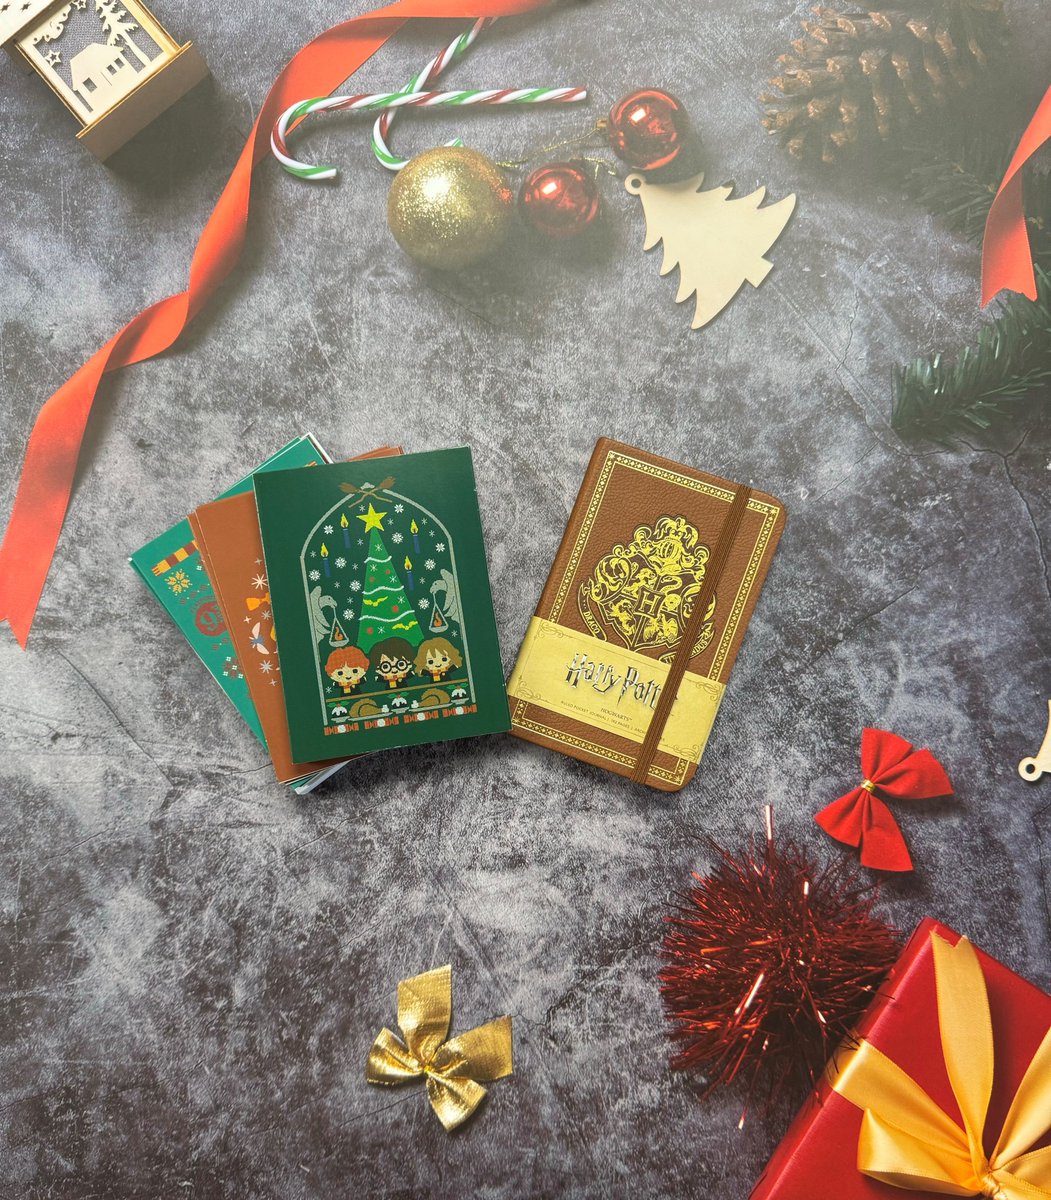 🎅Advent Giveaway!🎅 Are you a Harry Potter fan? Enter our #adventgiveaway and you could win these amazing gifts! Repost & follow us to enter. Hurry, the competition ends soon! More info & T&Cs: bit.ly/3N9hXL2 @insighteditions #GiveAway #HarryPotter #Christmas